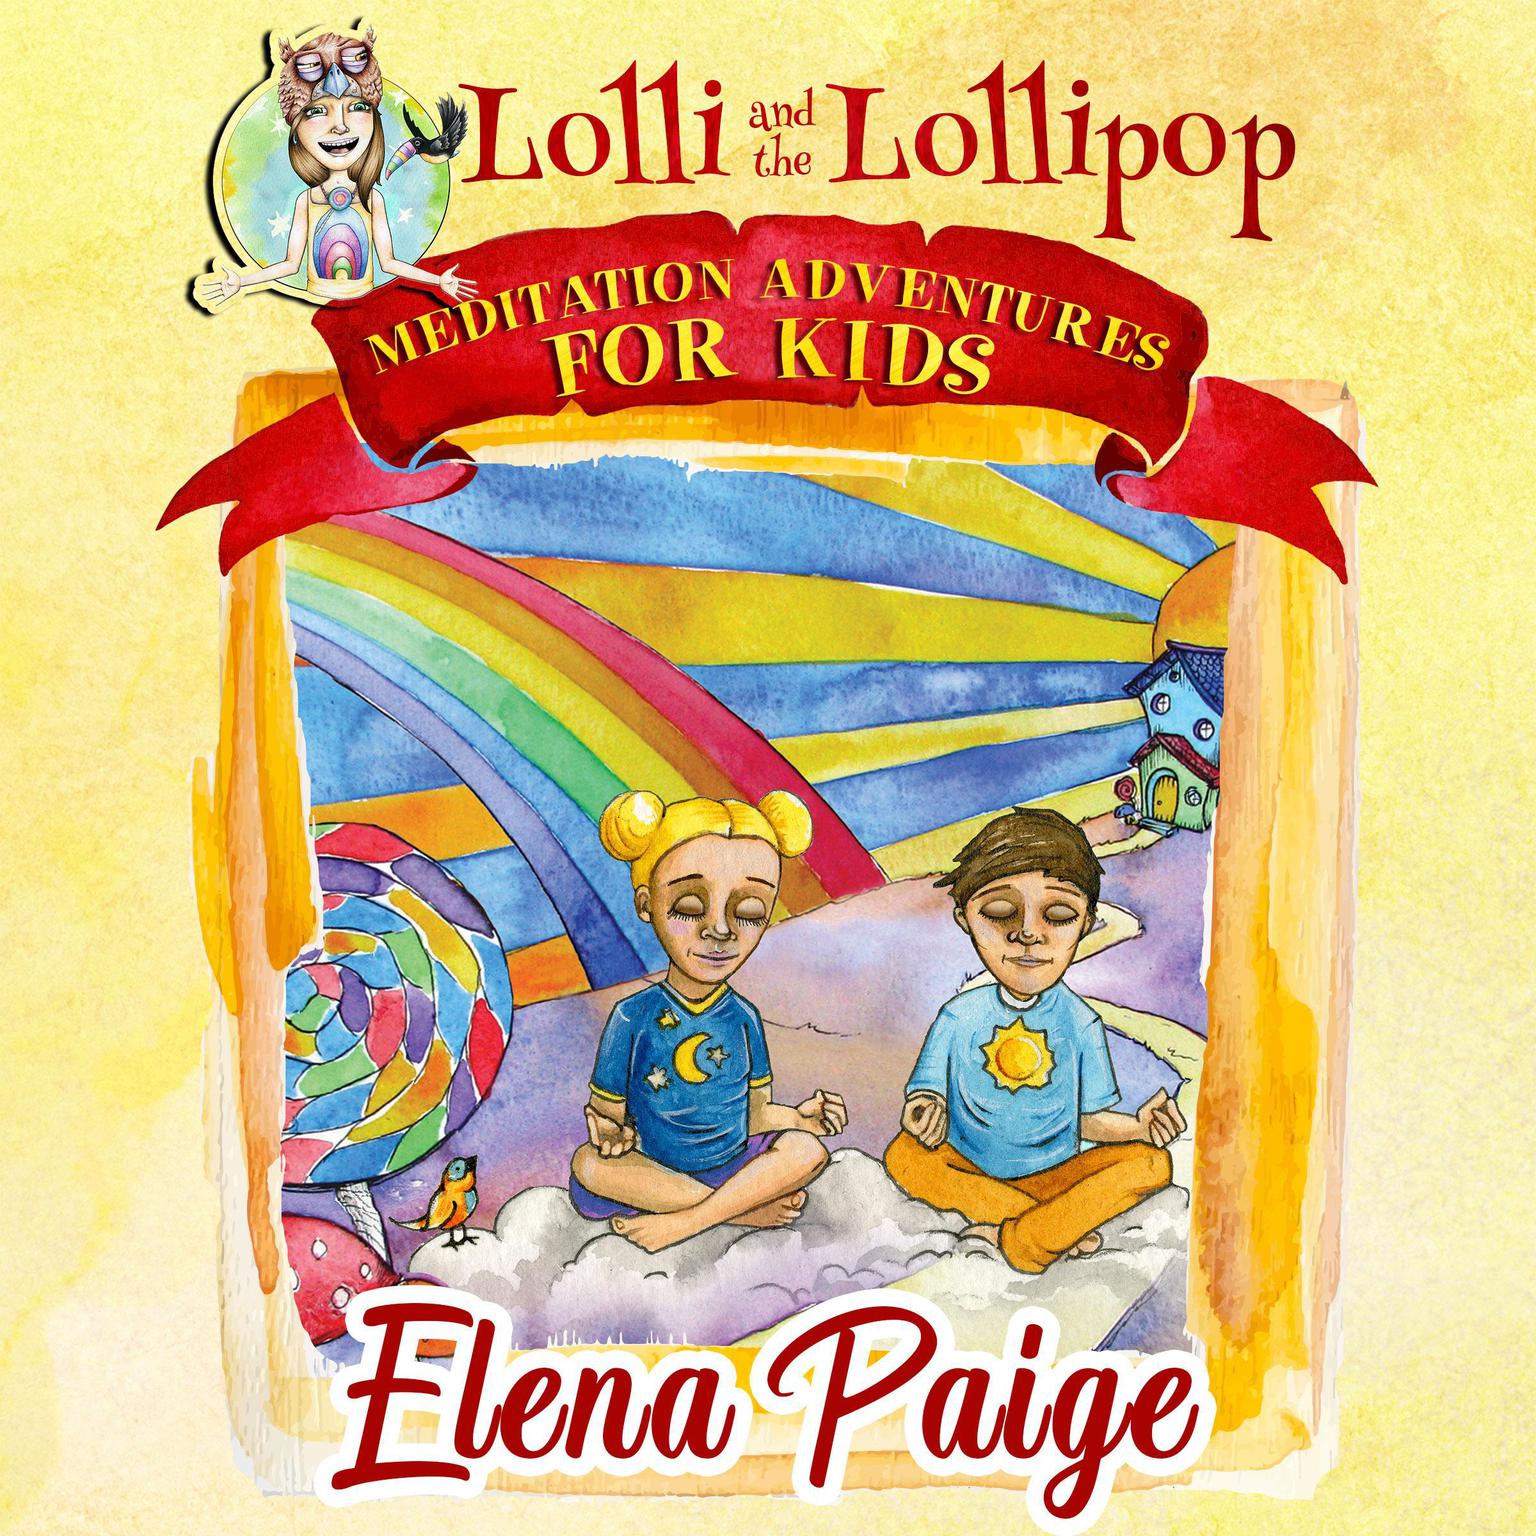 Lolli and the Lollipop (Meditation Adventures for Kids - volume 1): Meditation Adventures for Kids Audiobook, by Elena Paige